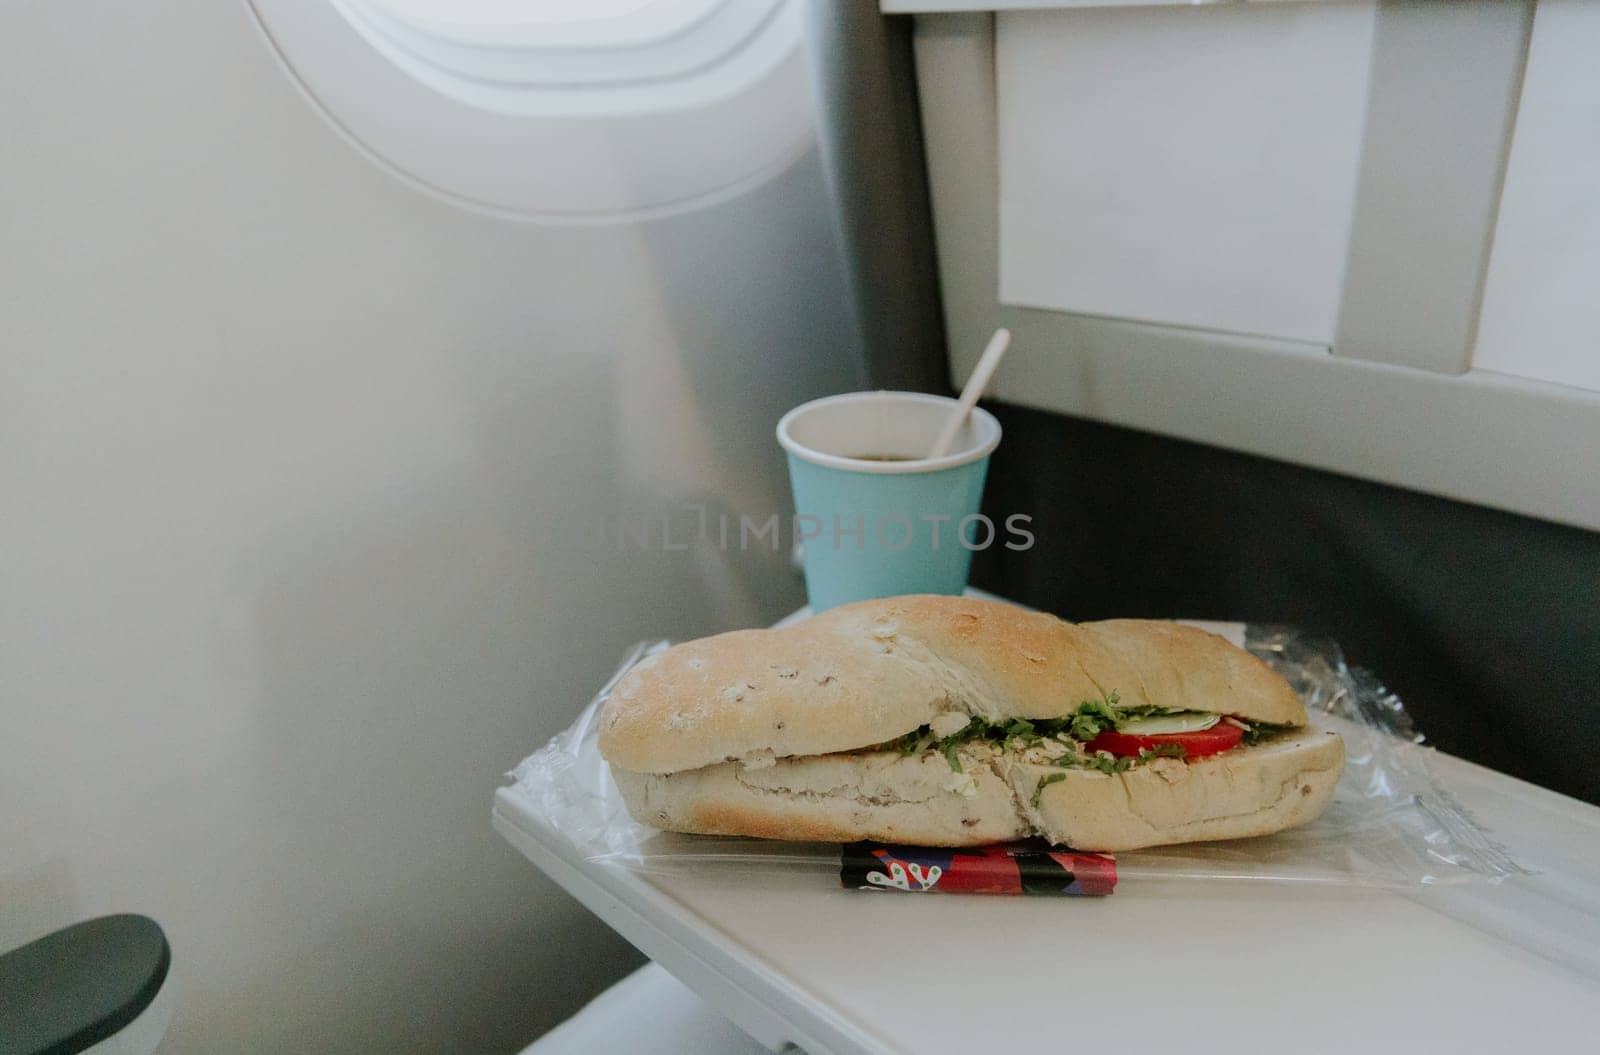 Sandwich and glass of tea on the plane. by Nataliya